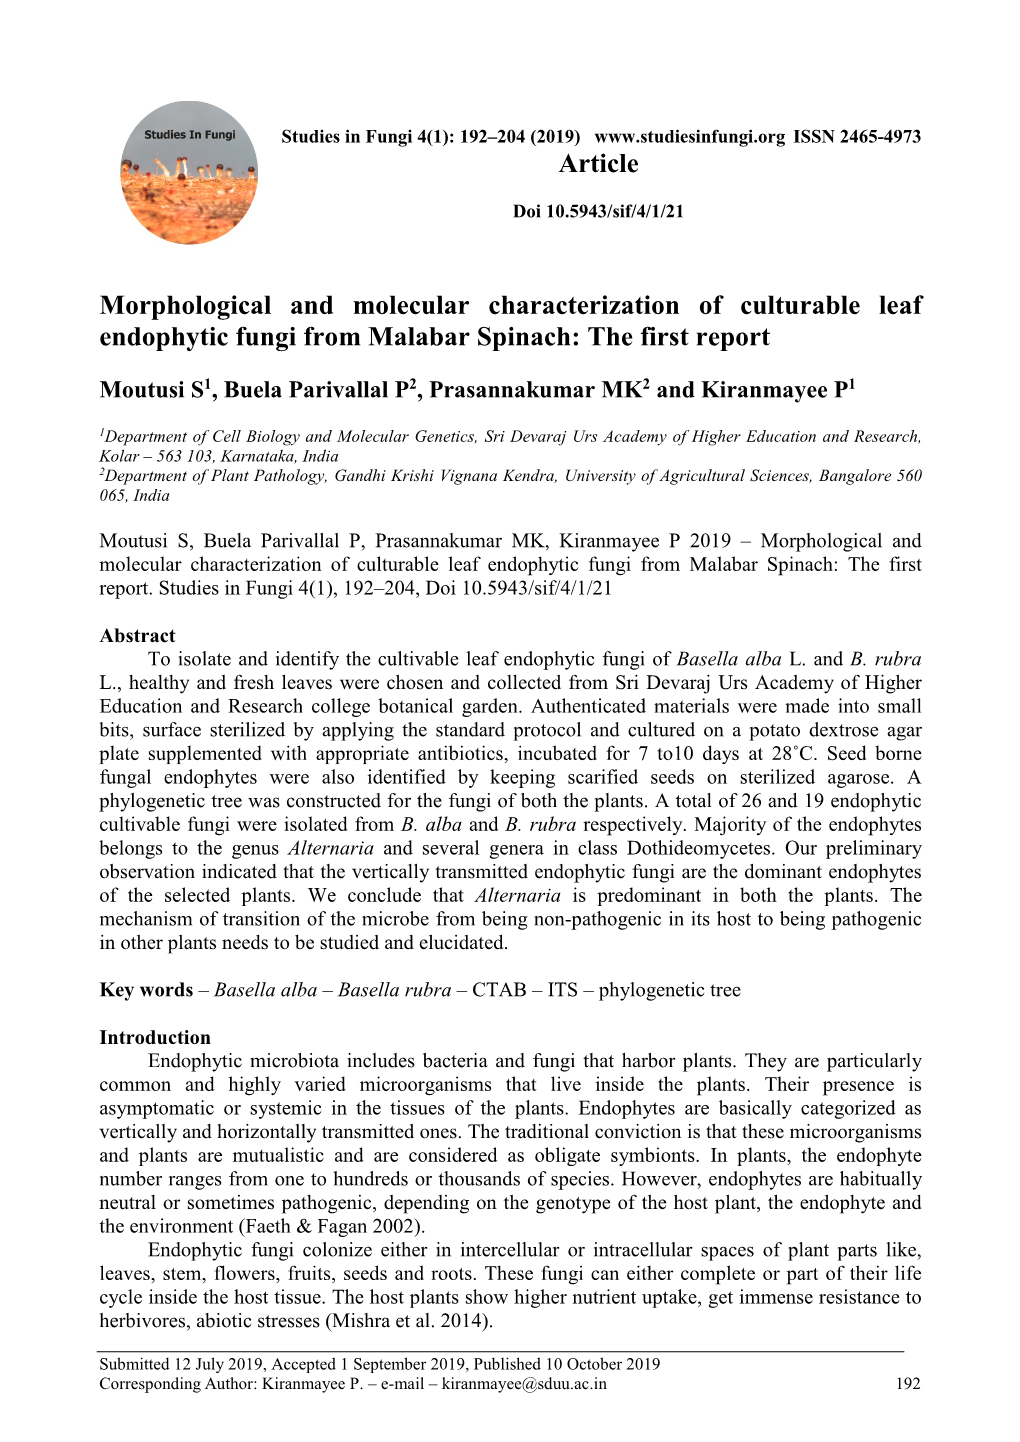 Morphological and Molecular Characterization of Culturable Leaf Endophytic Fungi from Malabar Spinach: the First Report